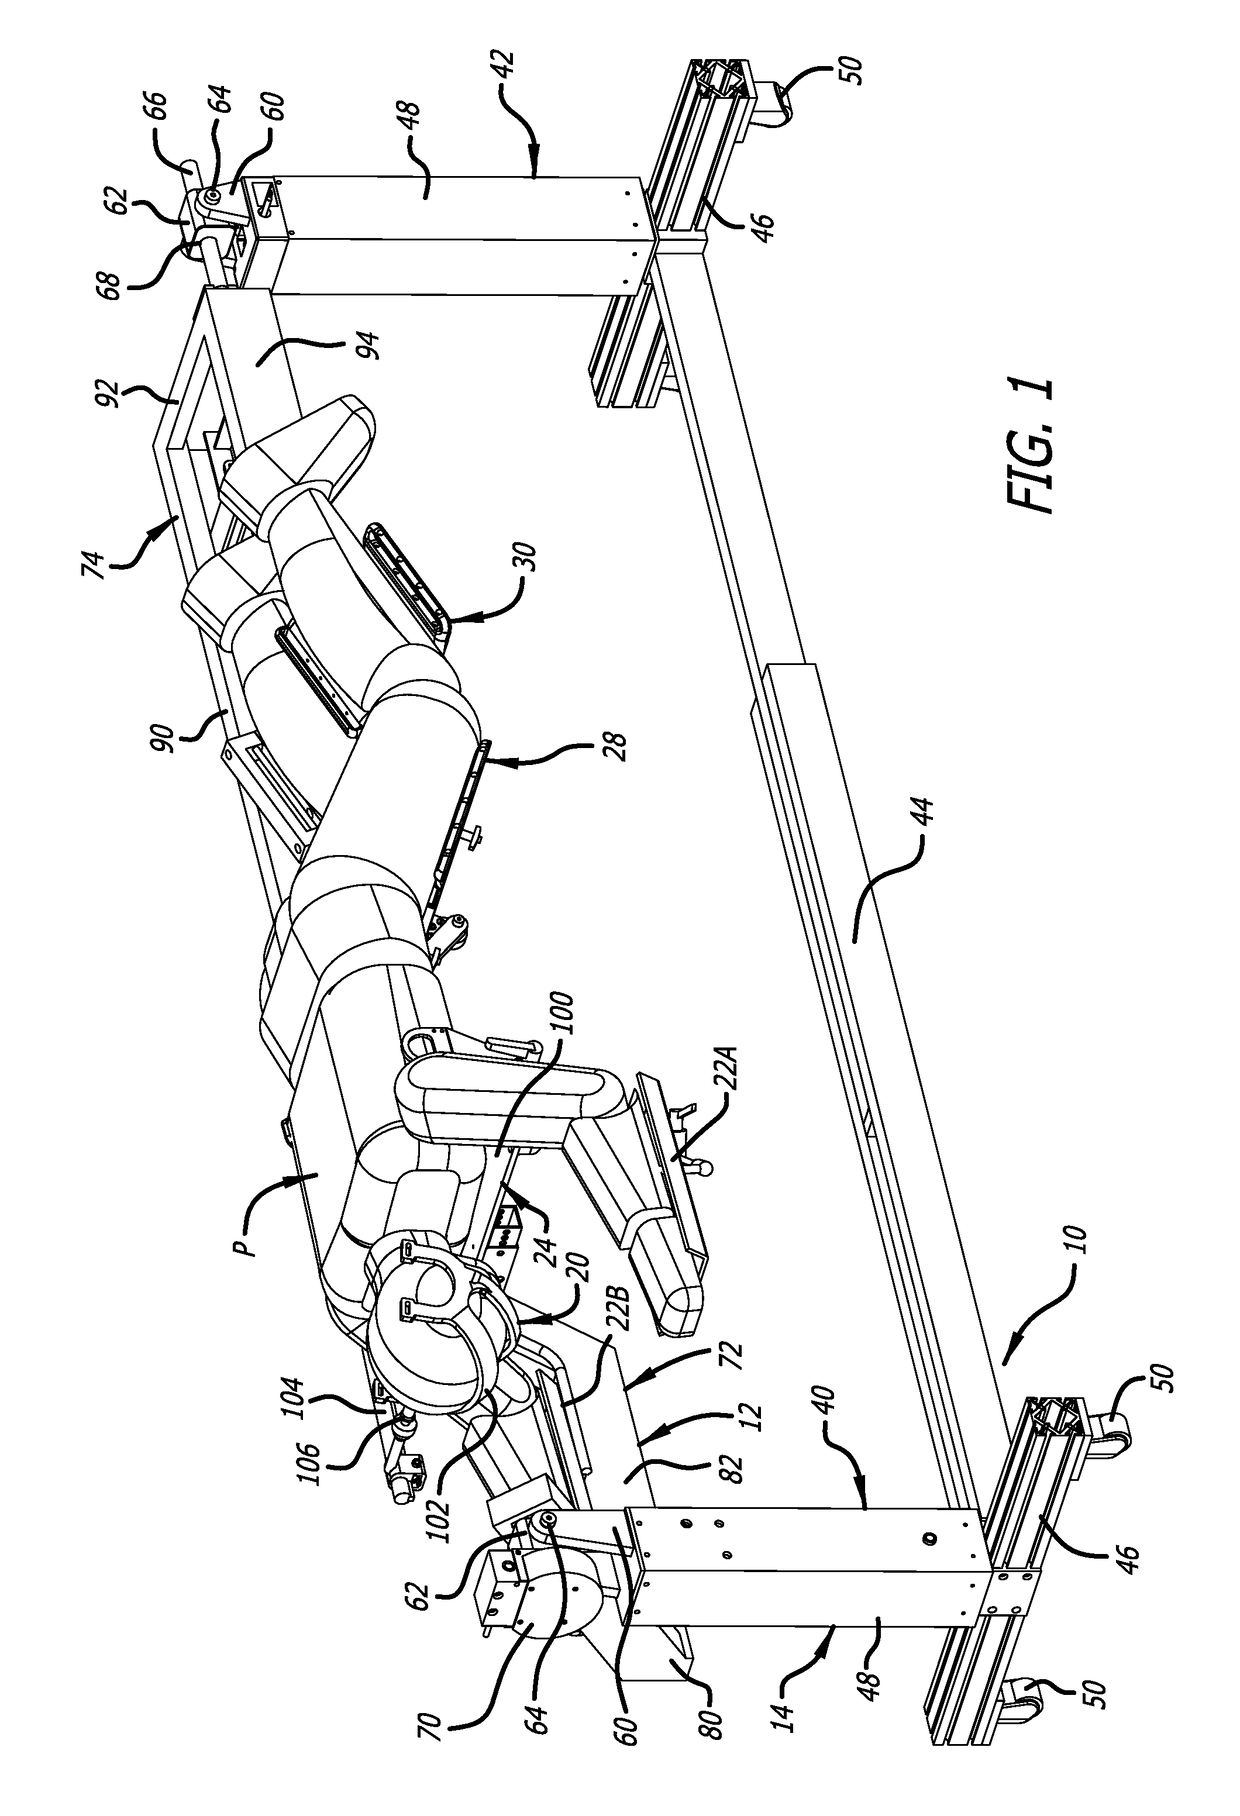 Surgical frame including main beam for facilitating patient access